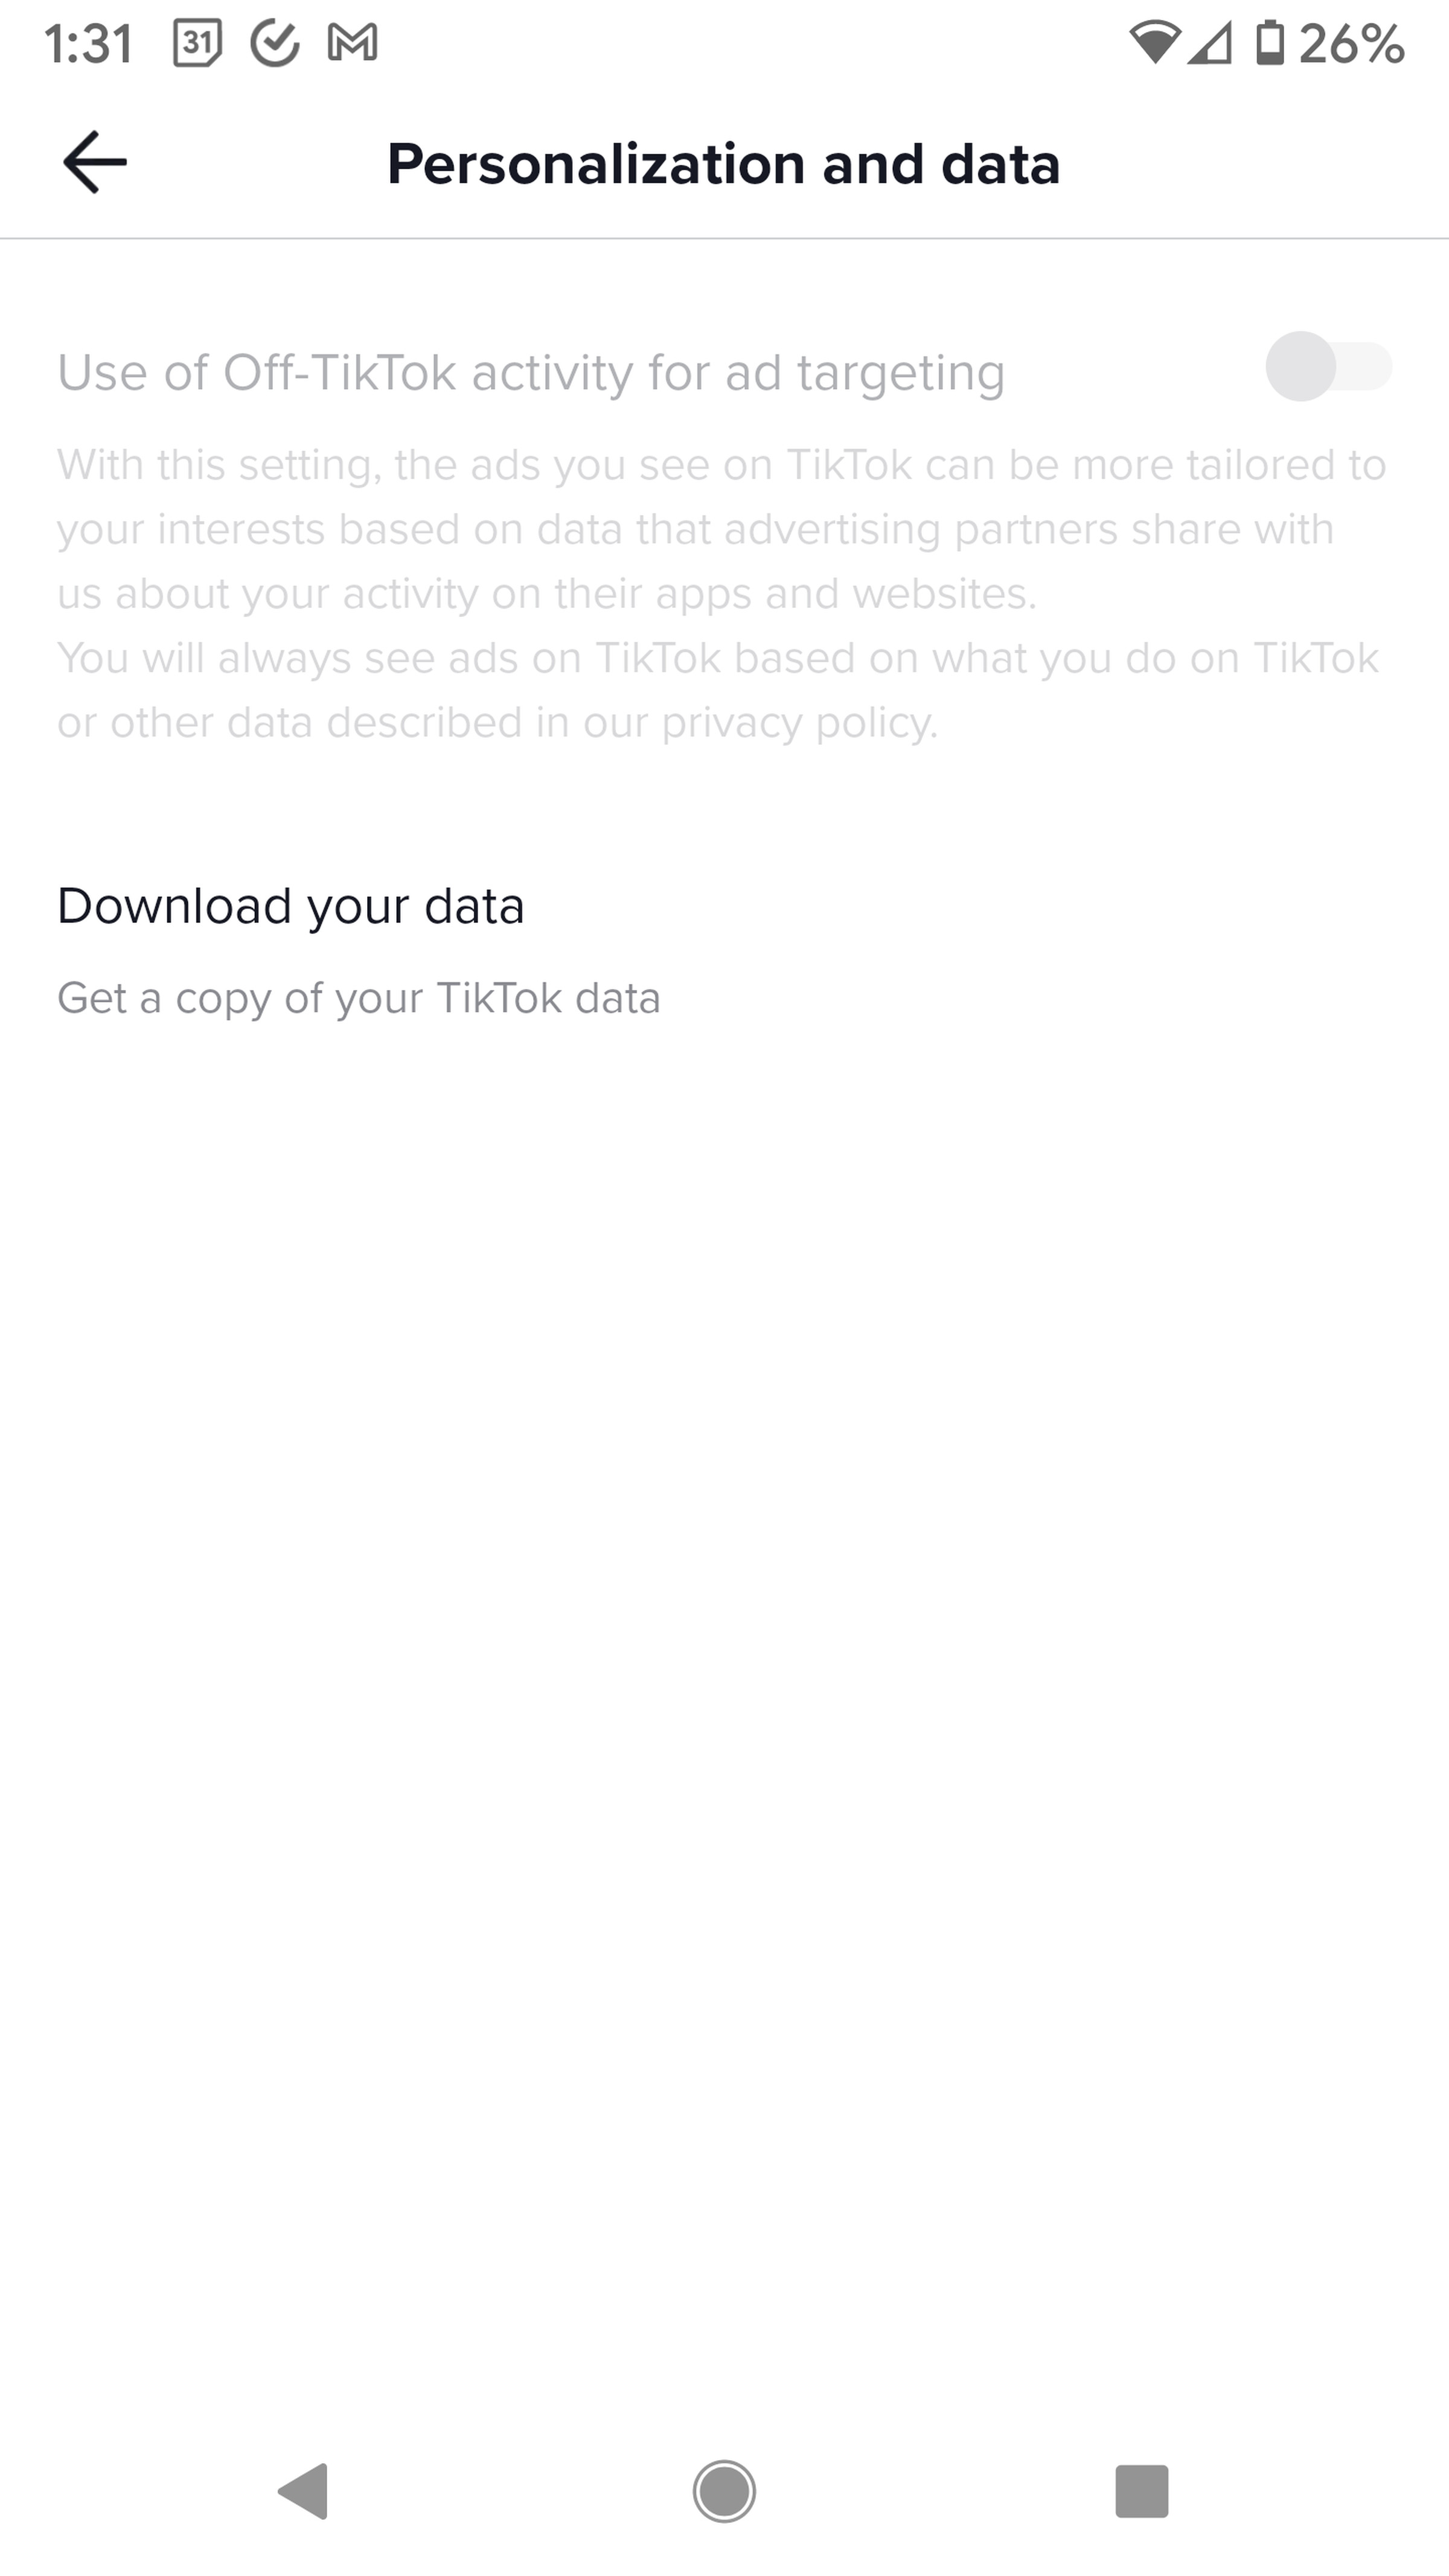 Select “Download your data” to get a copy of your watch history.